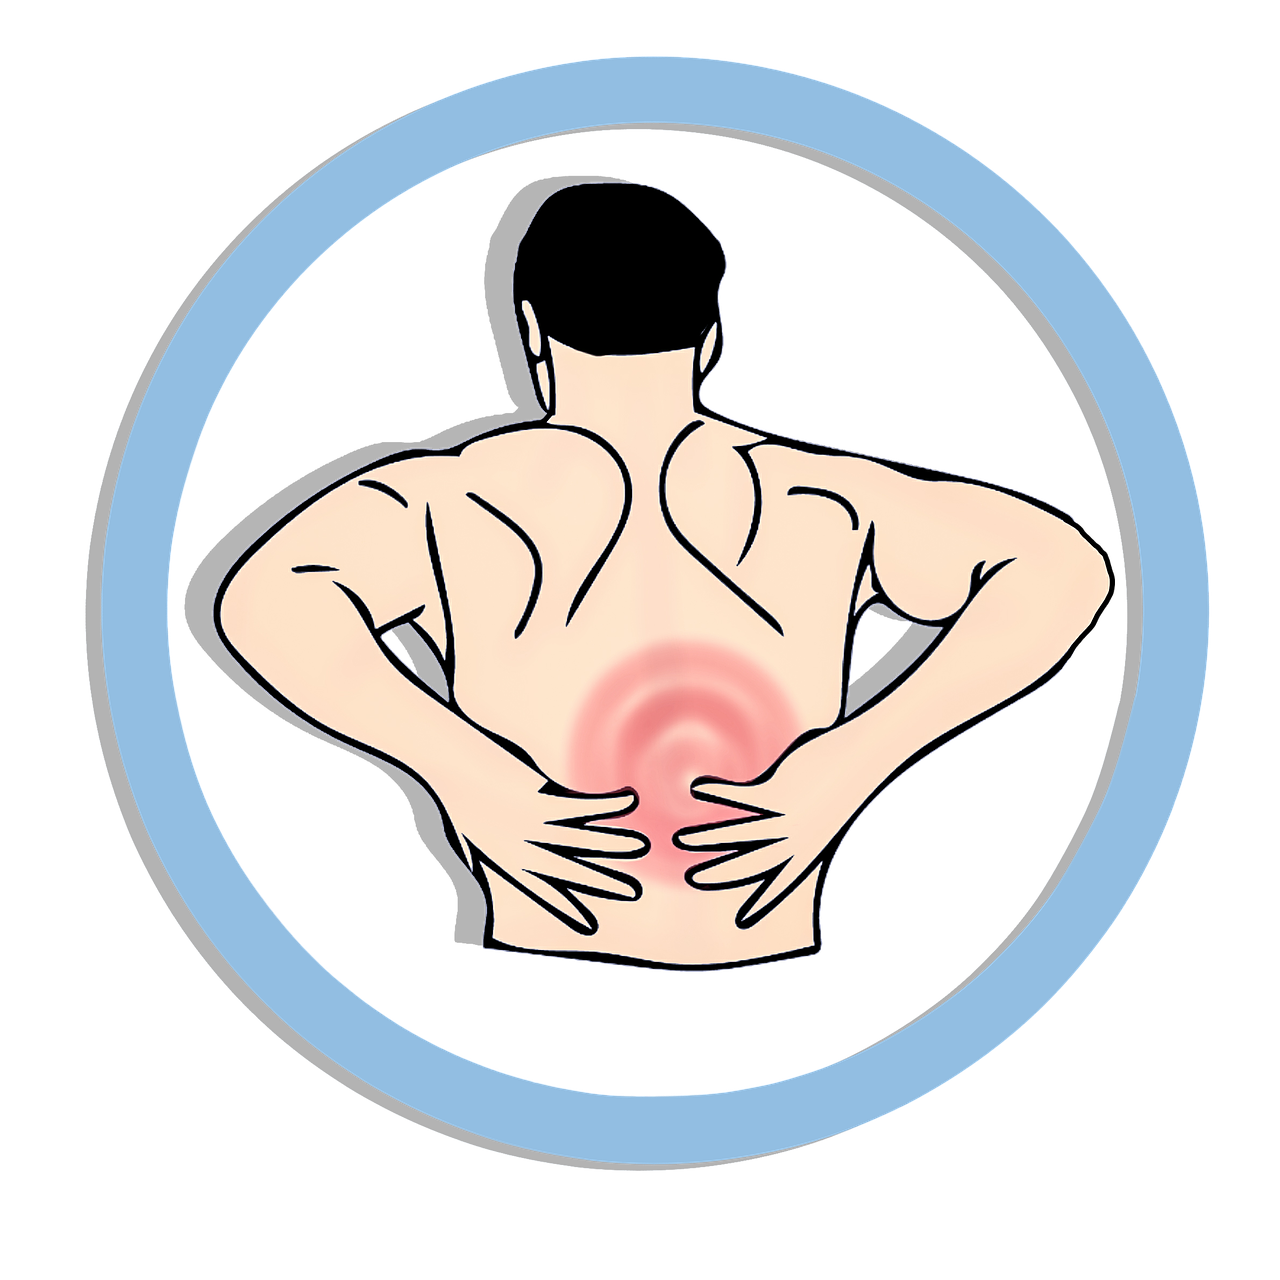 Exercises For Back Pain After A Car Accident The Law Office Of Rick Wagner